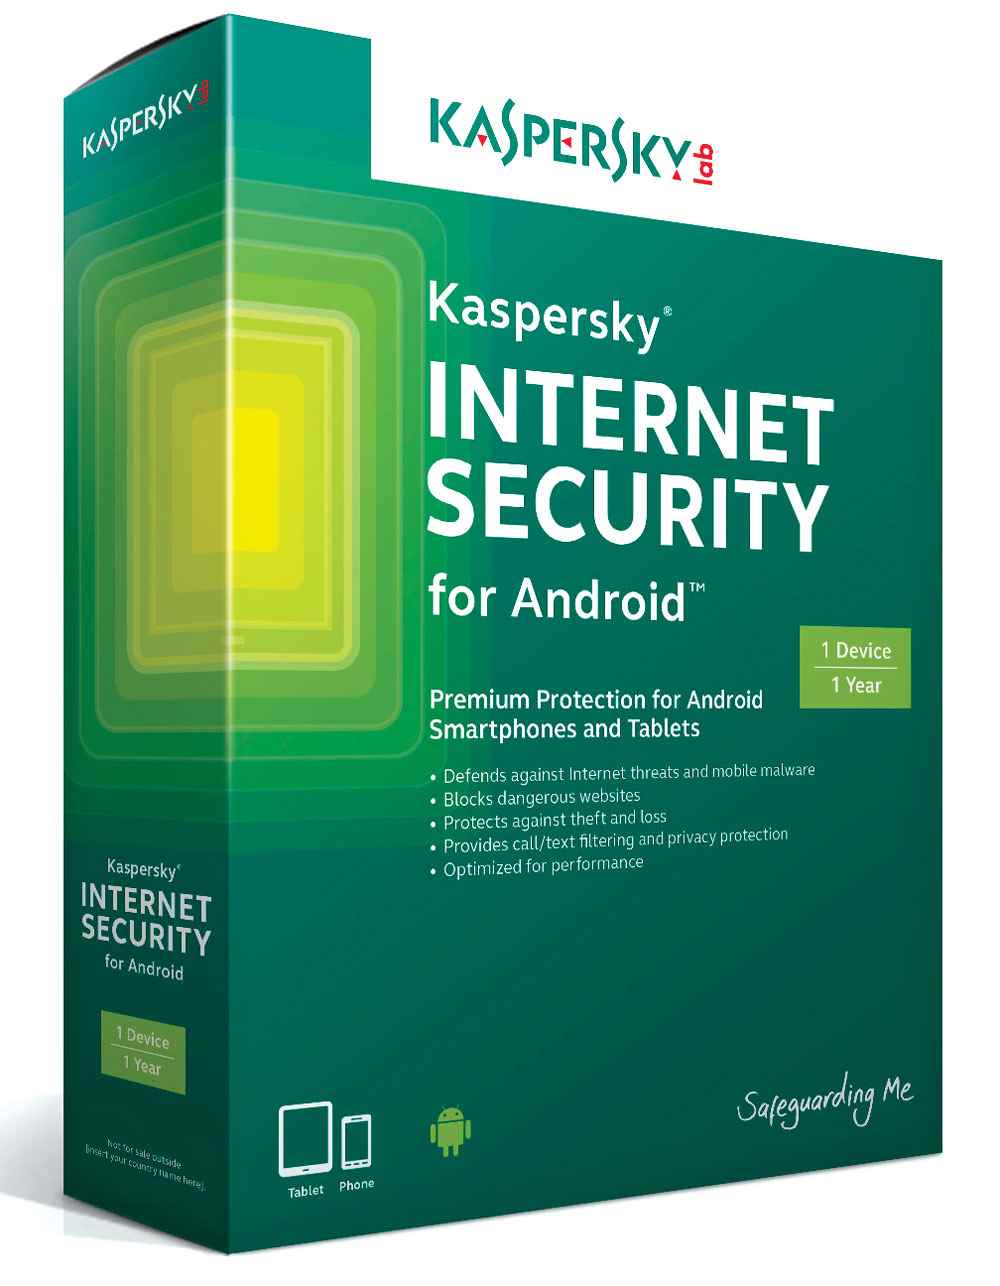 kaspersky-internet-security-for-android-2016-techaddikt